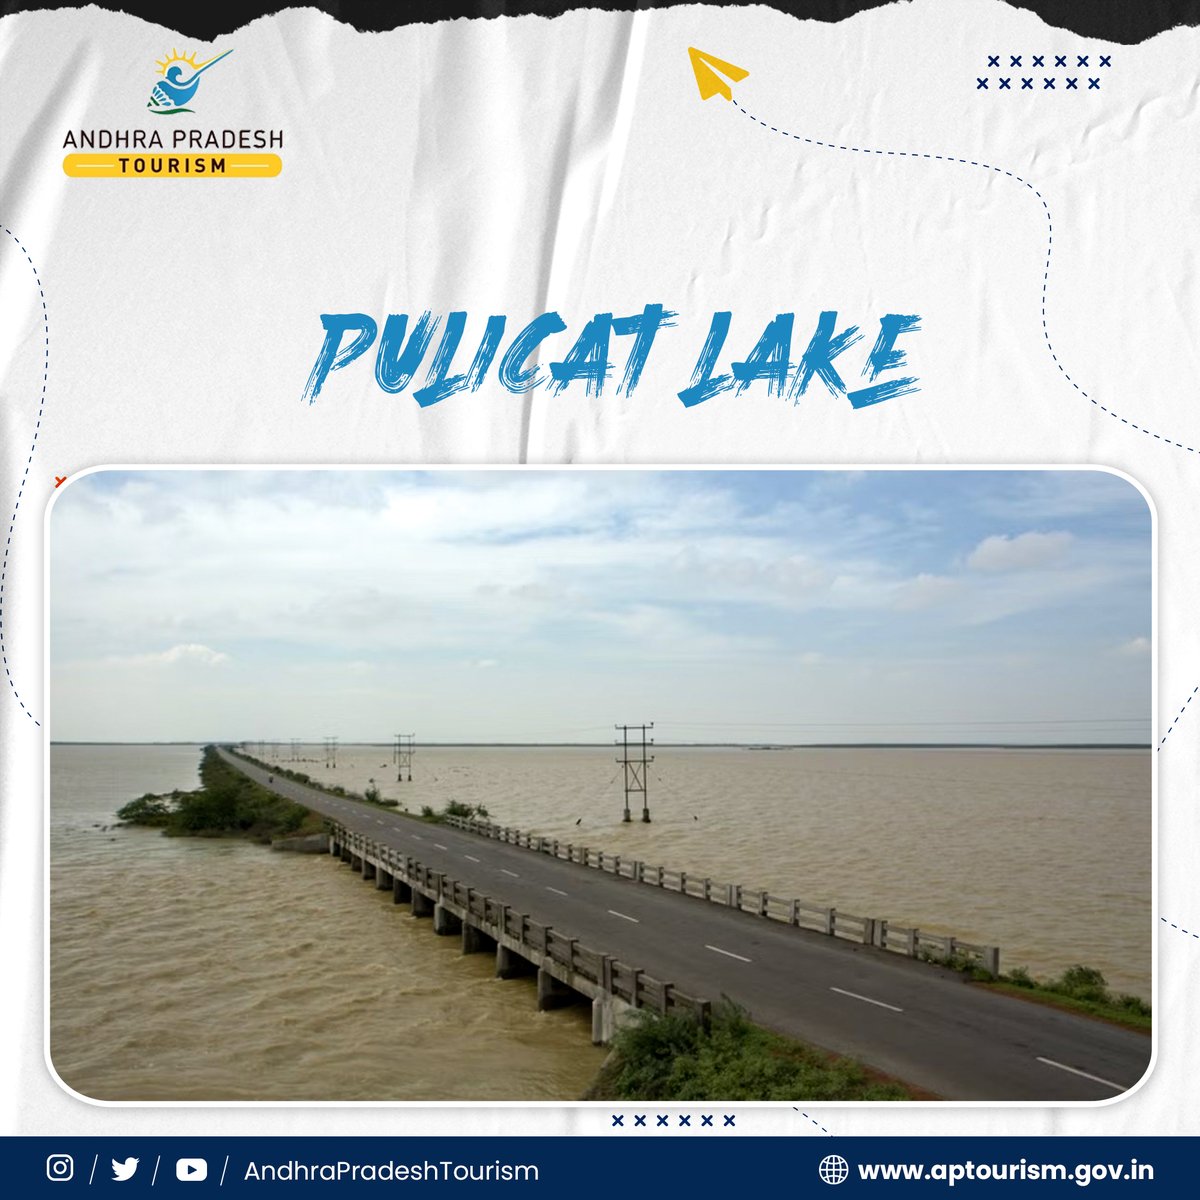 📍Pulicat Lake This lagoon lies in Tirupati district. Pulicat Lake is the second-largest brackish water lagoon in India. The large spindle-shaped barrier island named Sriharikota separates the lagoon from the Bay of Bengal. The lagoon encompasses the Pulicat Lake Bird Sanctuary.